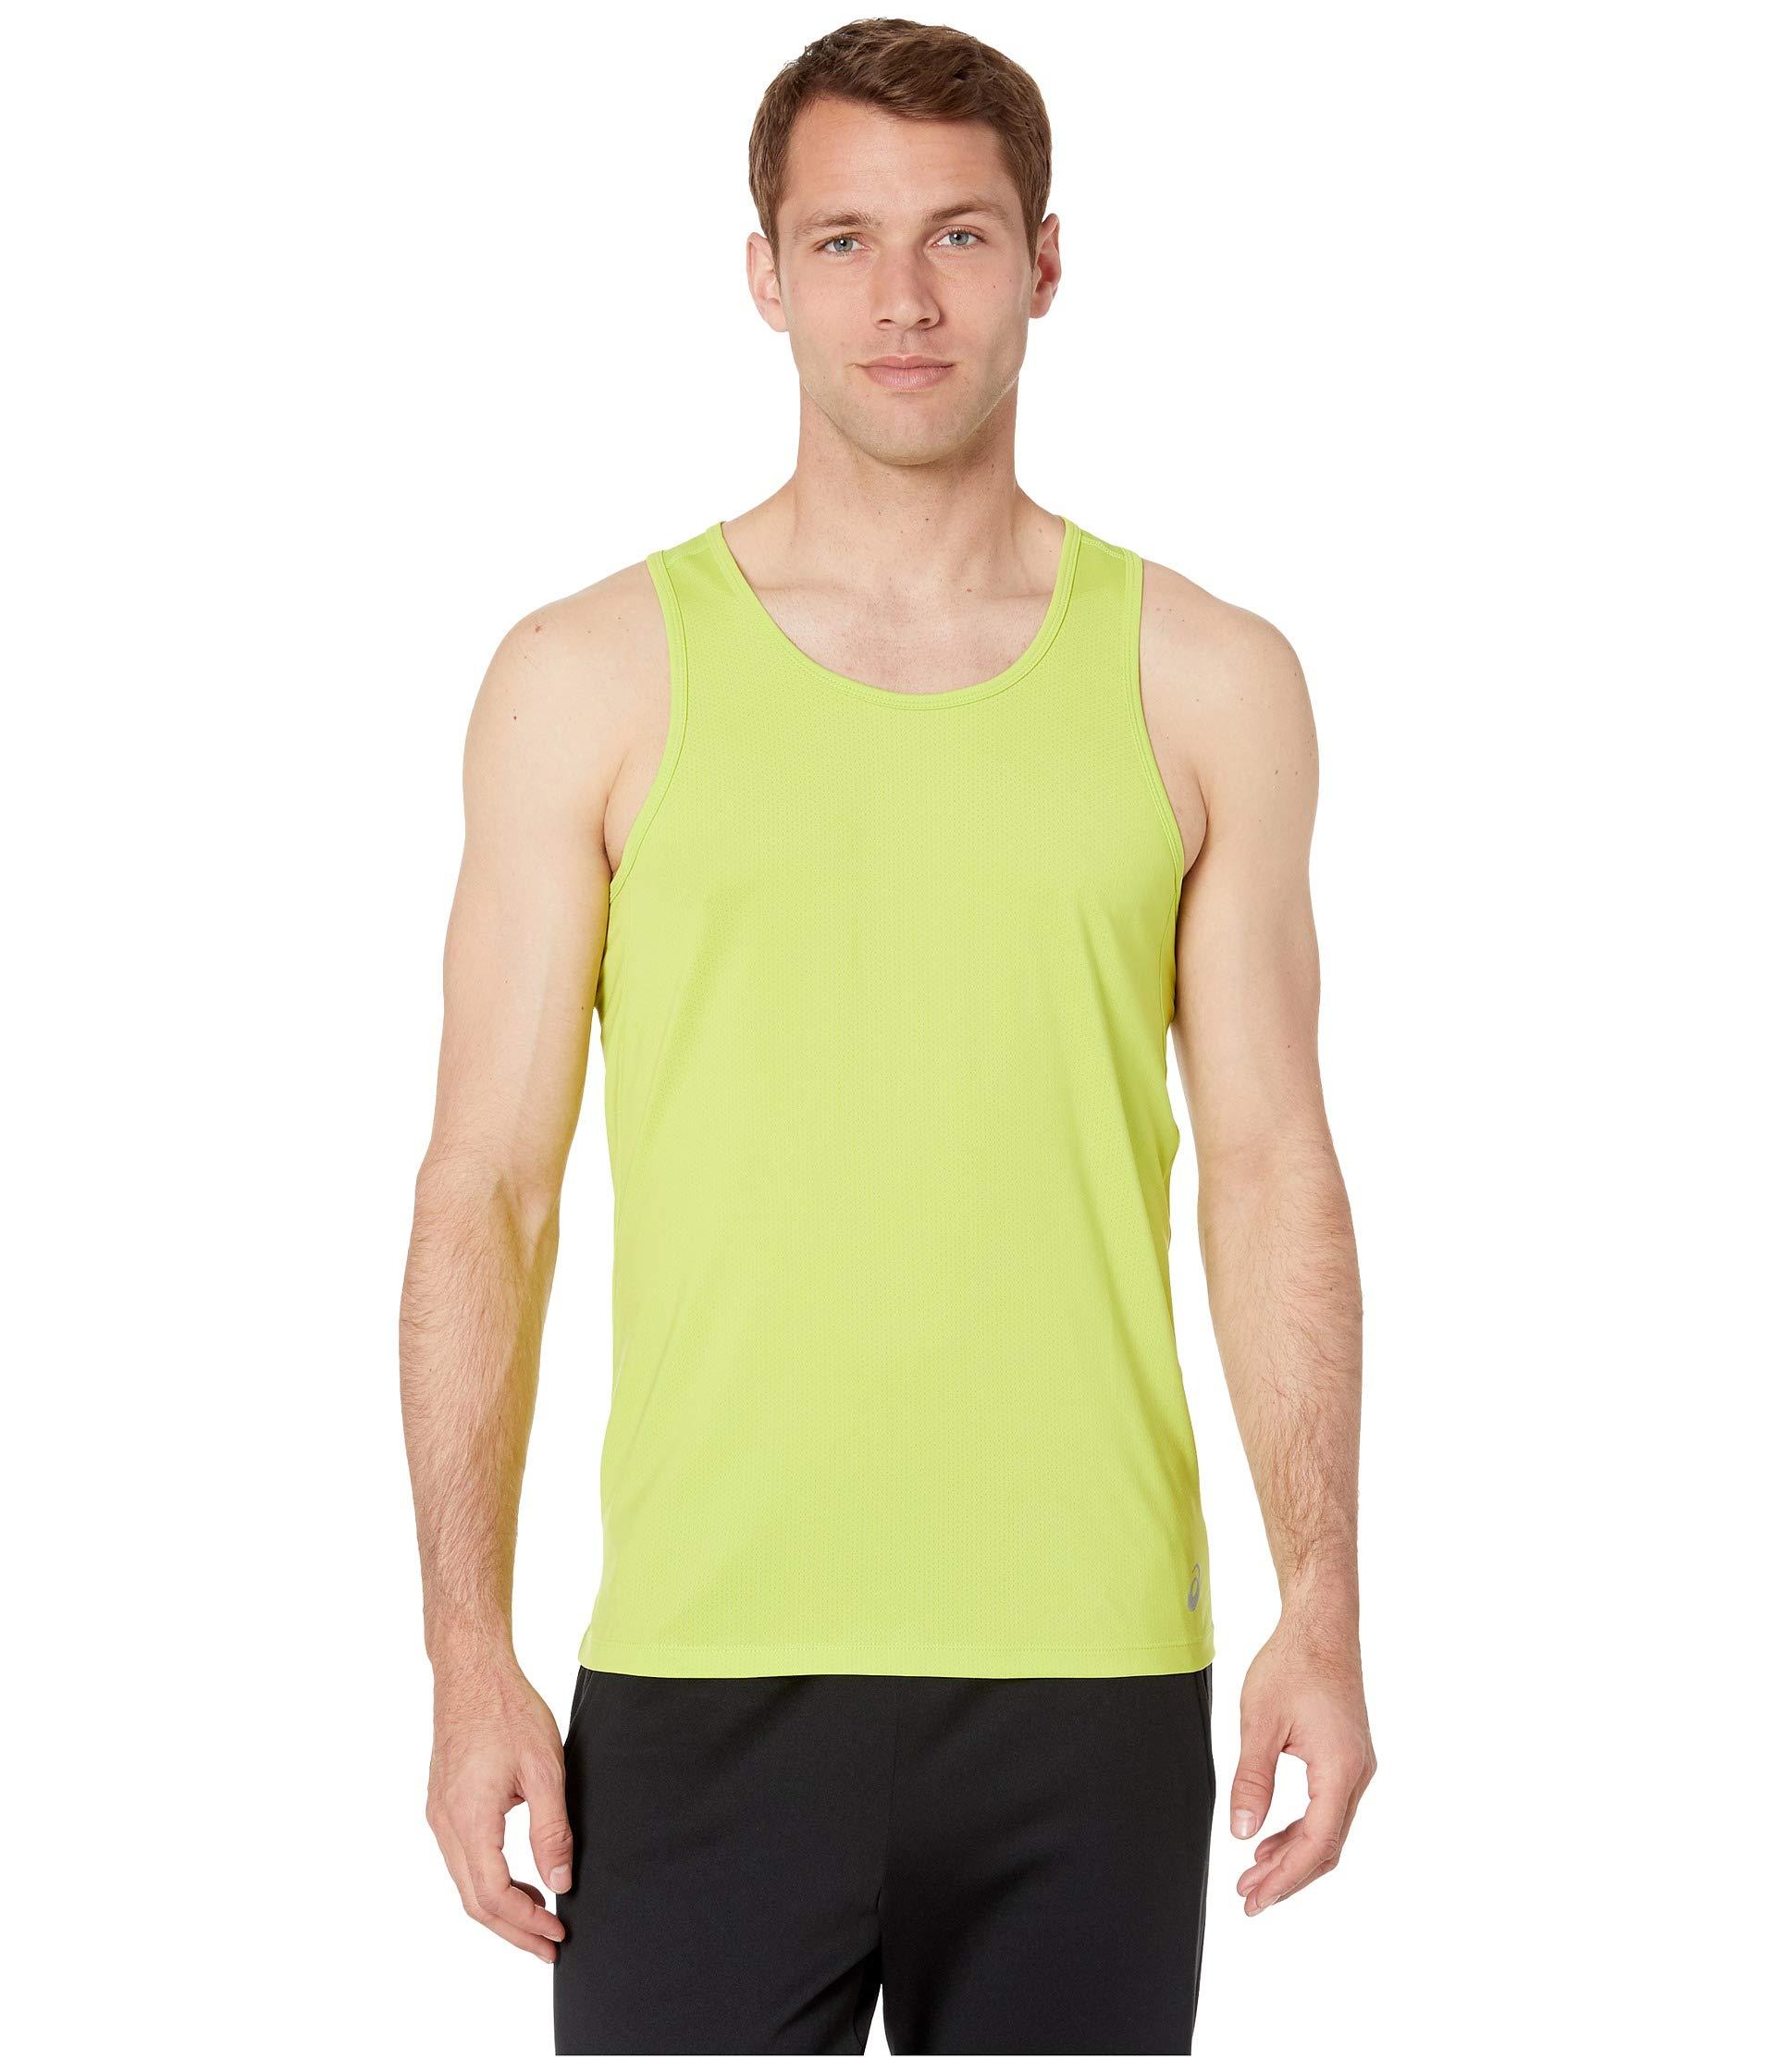 Asics Synthetic Run Singlet in Neon Lime (Green) for Men - Save 27% - Lyst